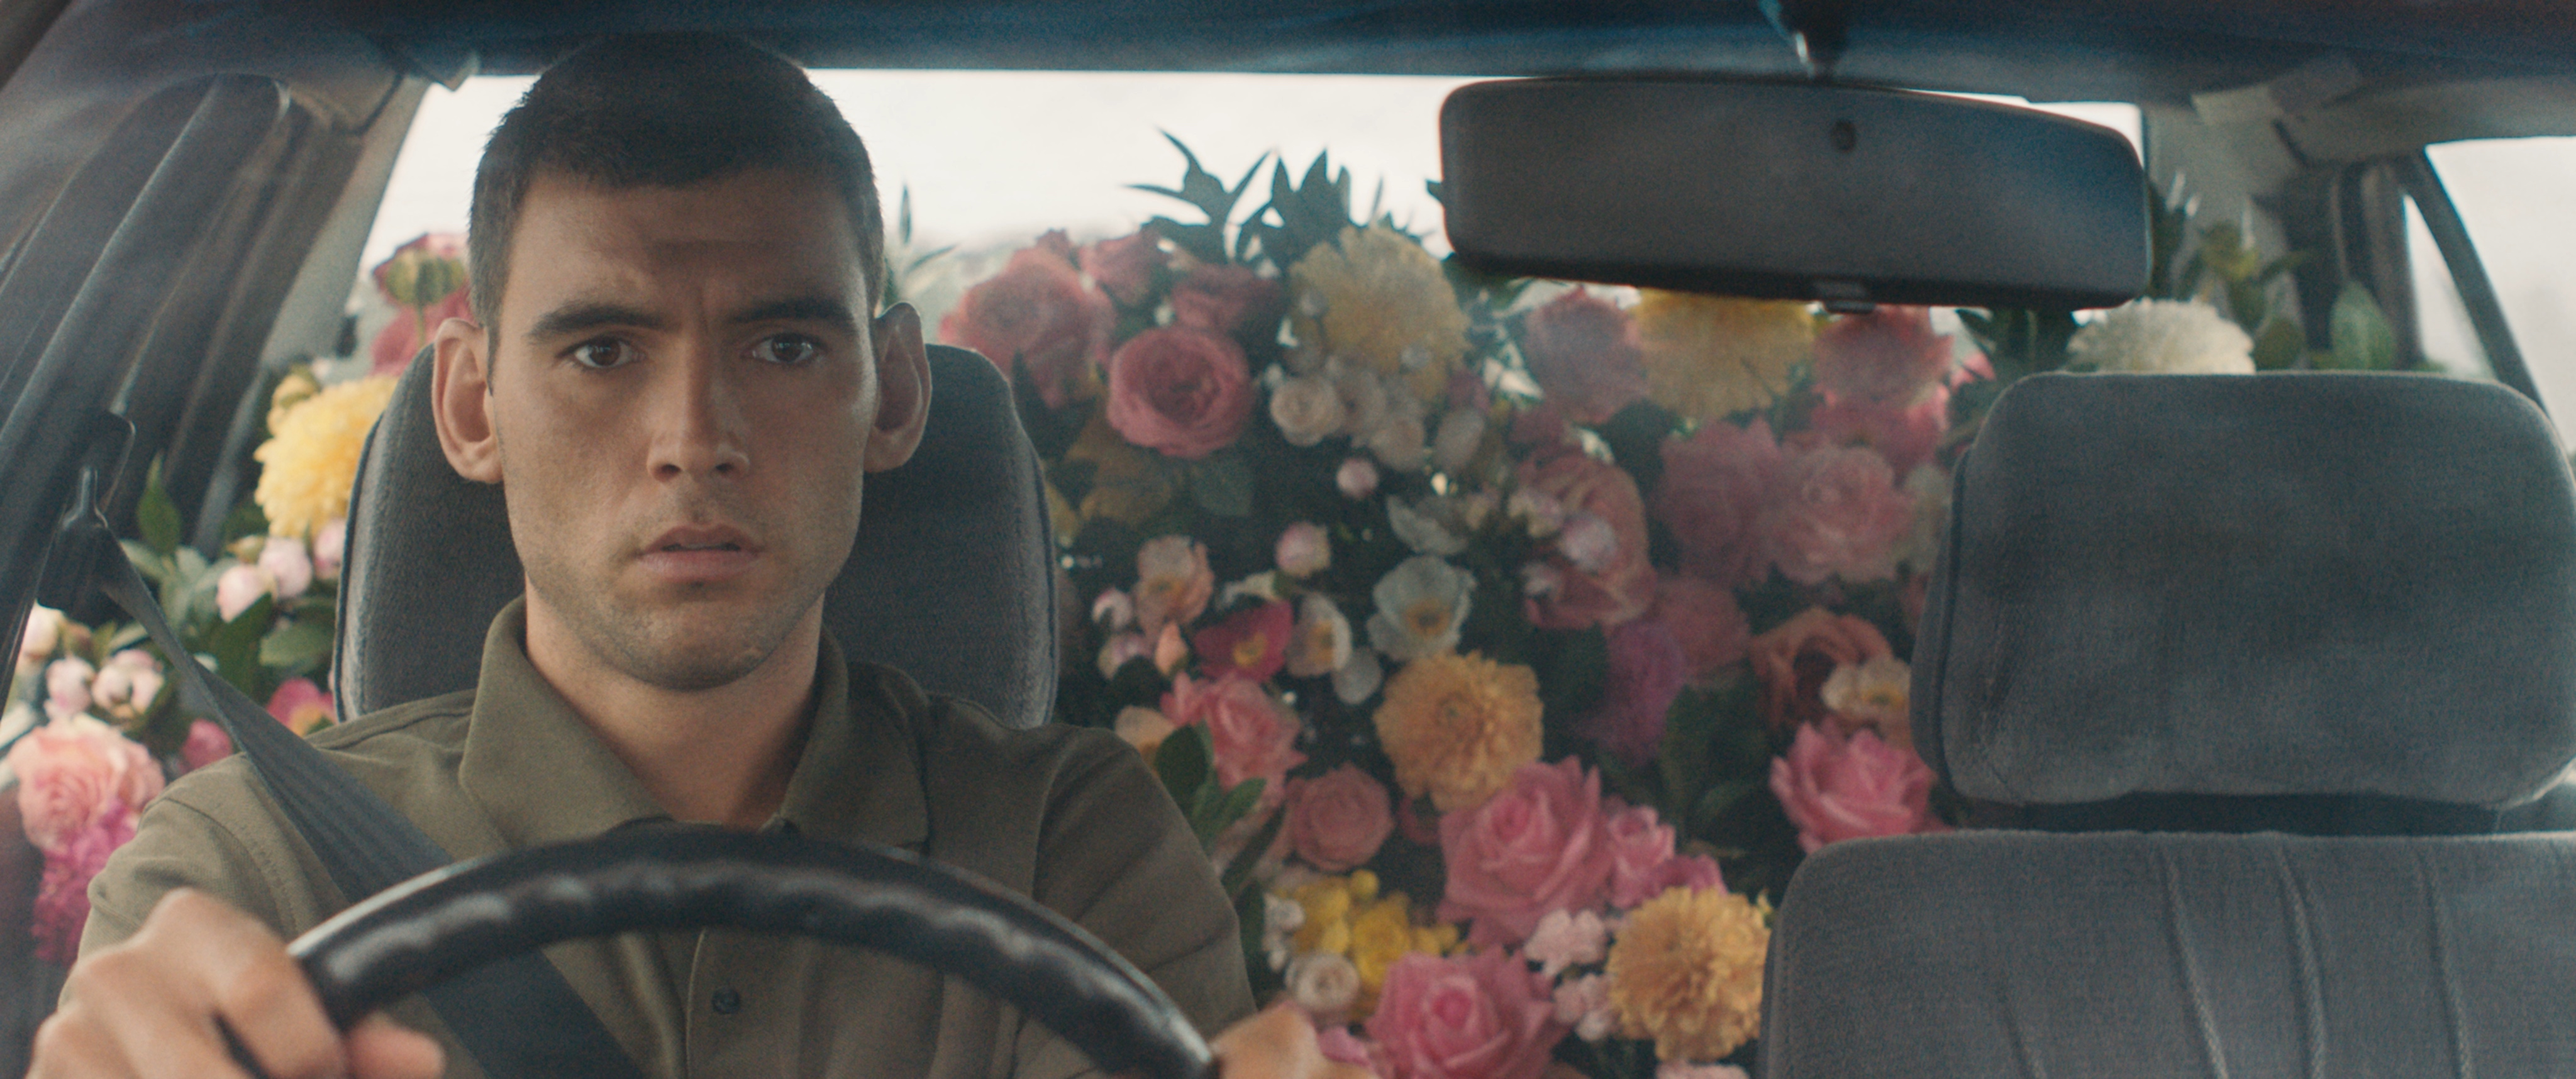 Film still of a flustered young man driving a car with a huge assortment of arranged flowers in pink, yellow, and white in the backseats.